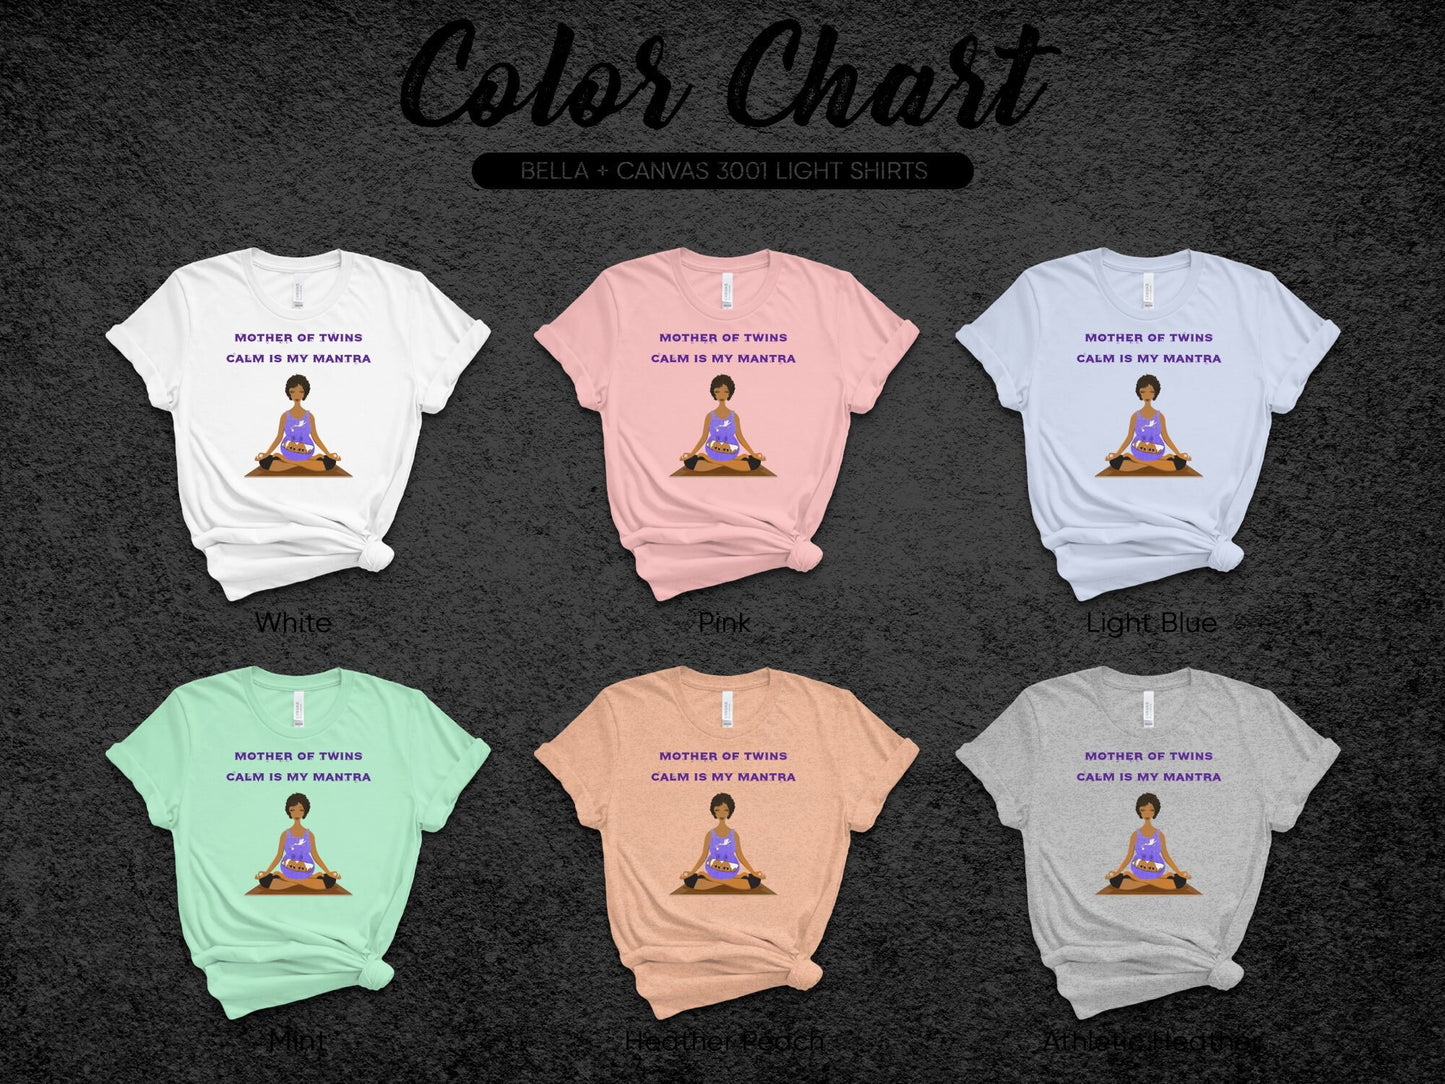 Mother of Twins, Calm Is My Mantra T-Shirt - Twin Mom's Essential, Twin Announcement, Have Twins Shirt